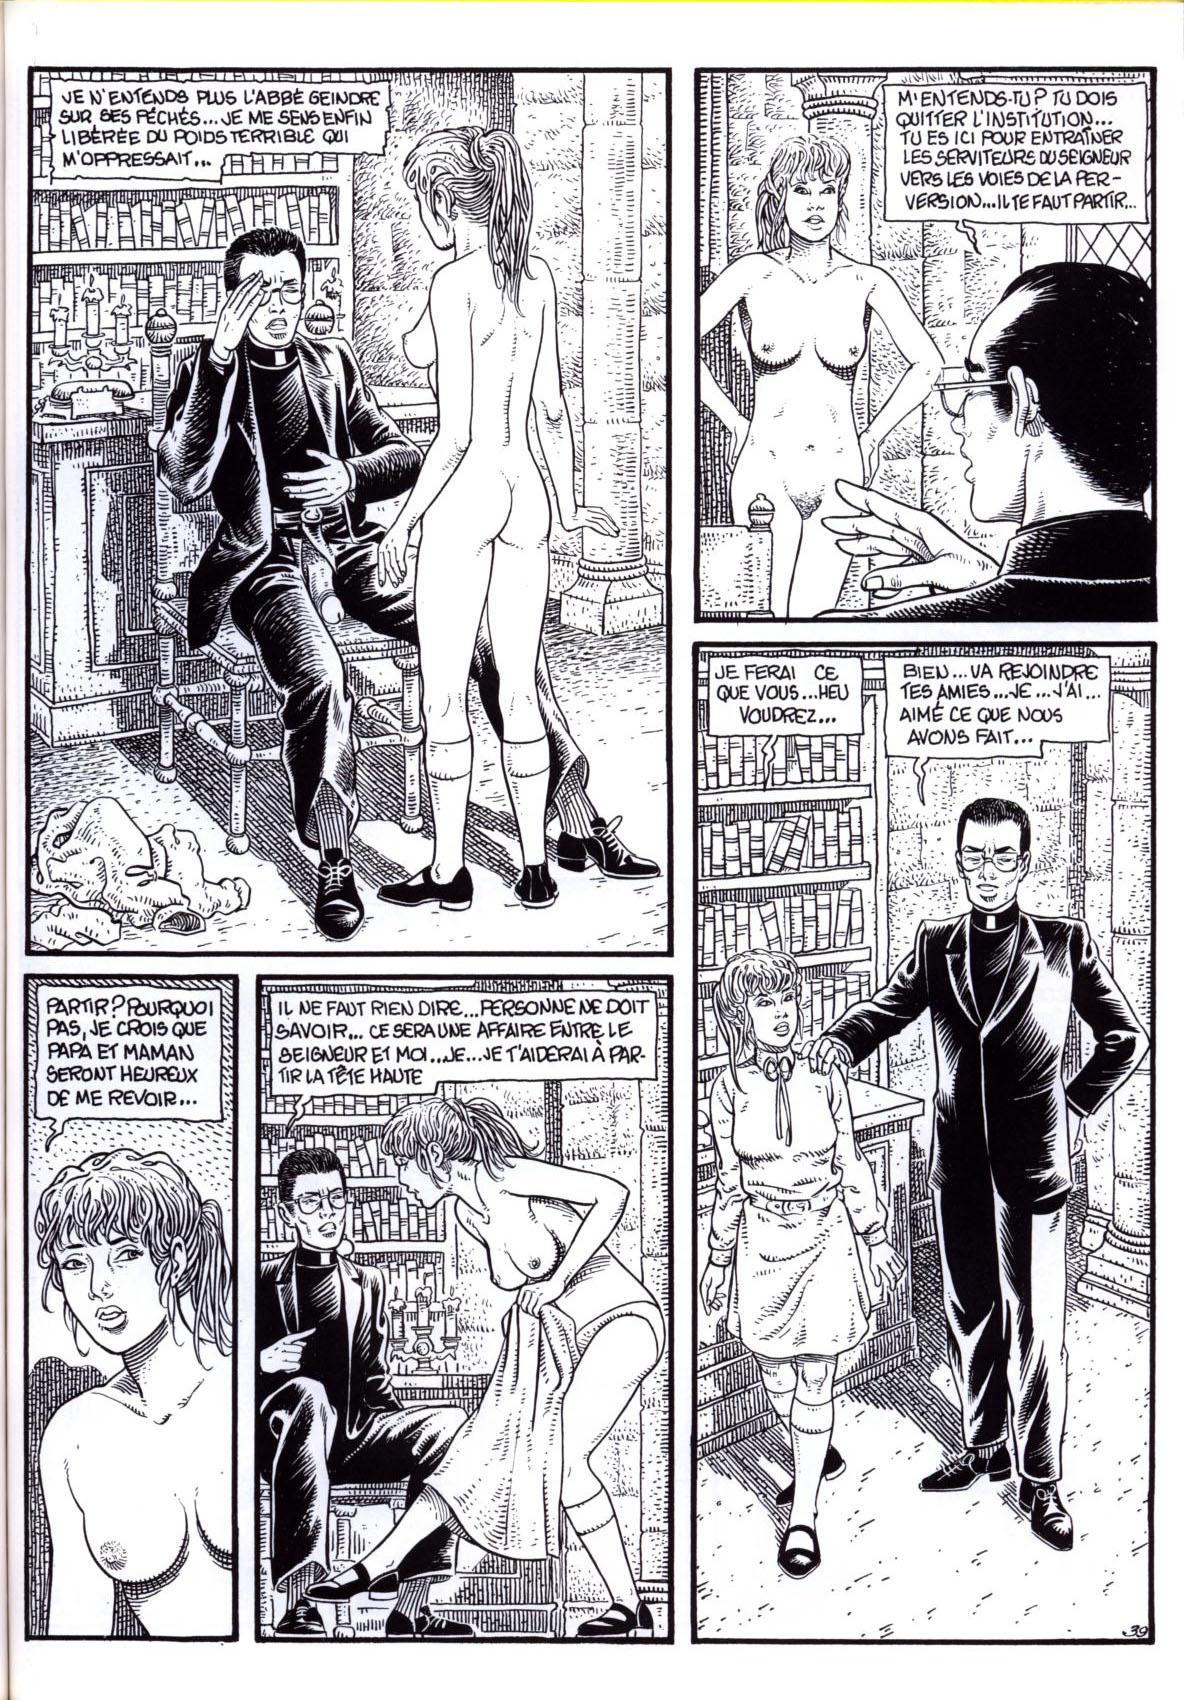 The Mary Magdalene Boarding School - Volume 3 numero d'image 41